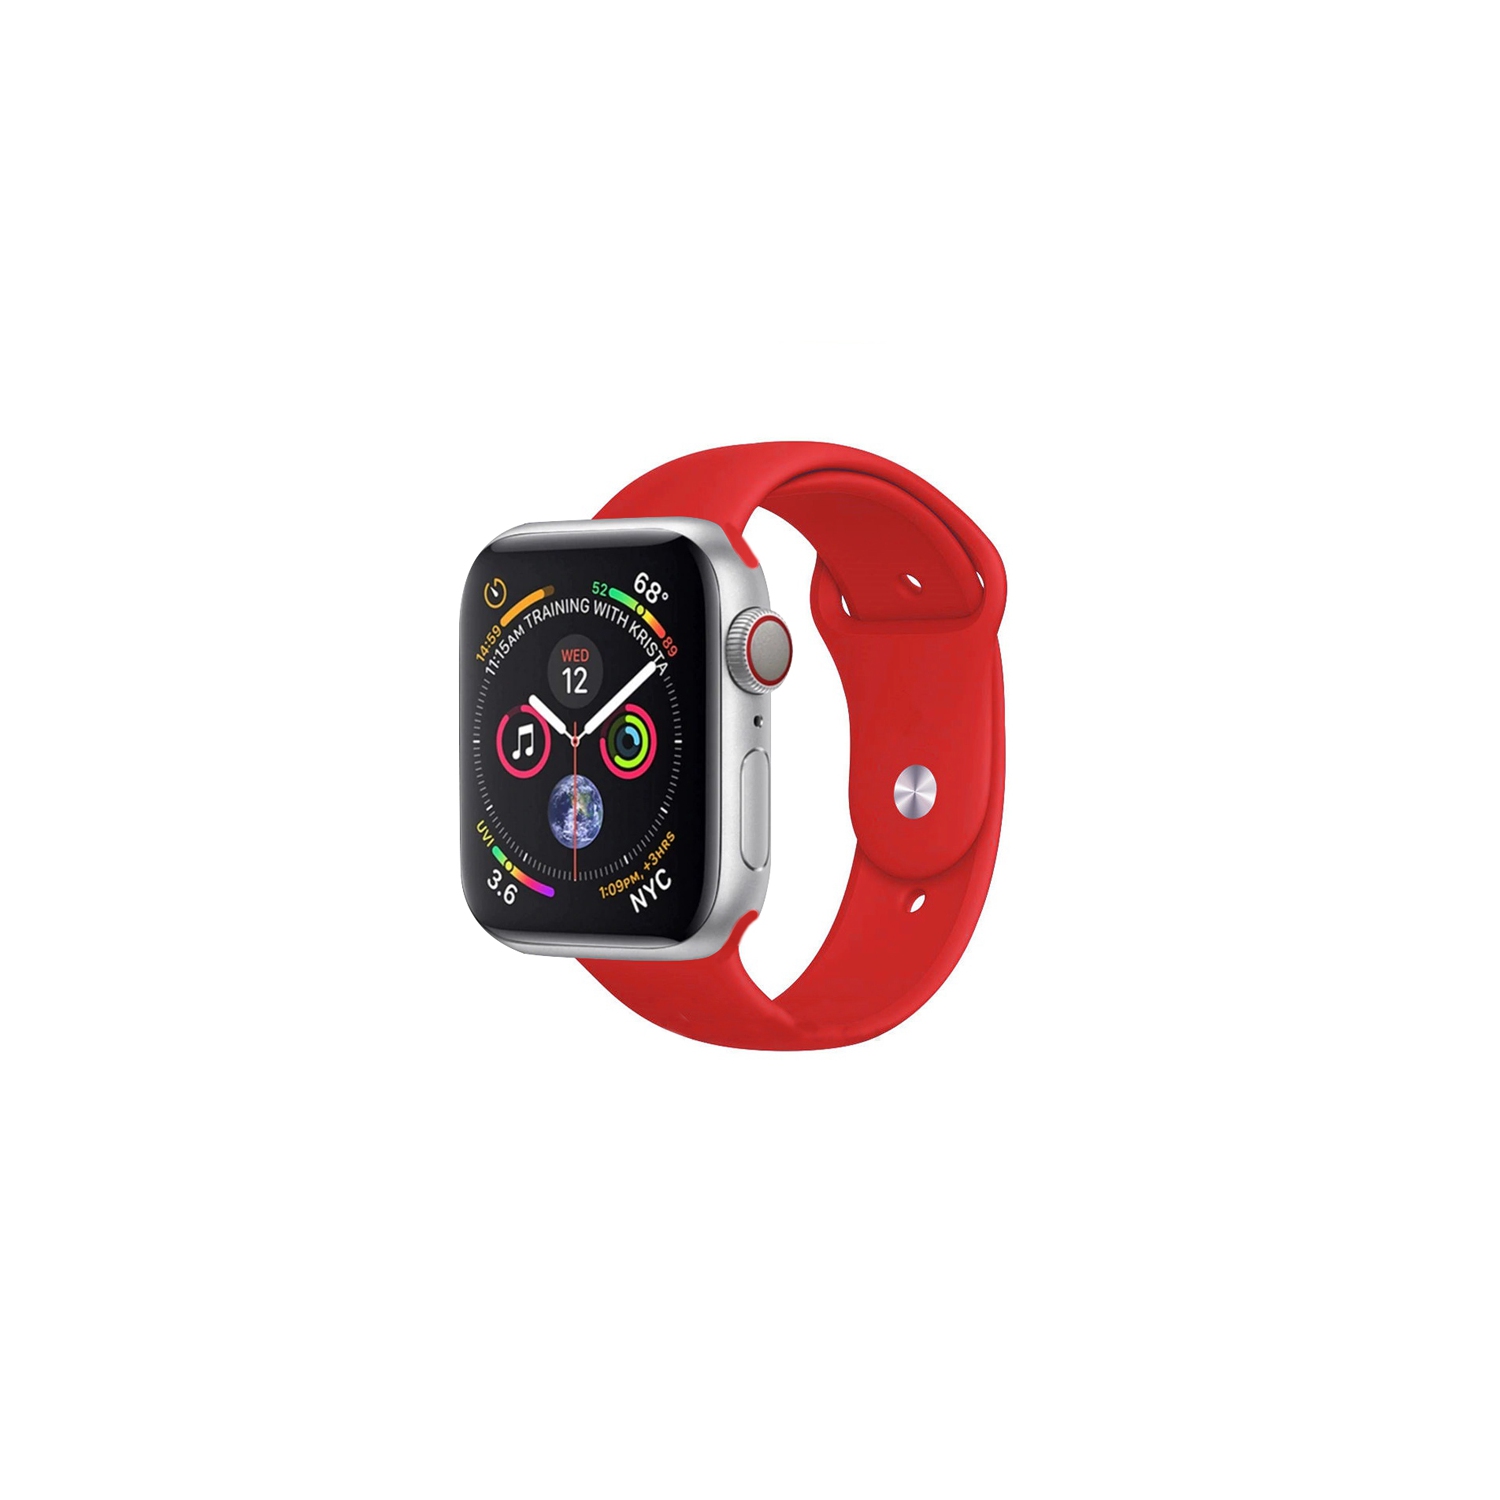 Watch Strap Silicone Sports Band Bracelet M/L Size For Apple iWatch Series 42mm/44mm - Red